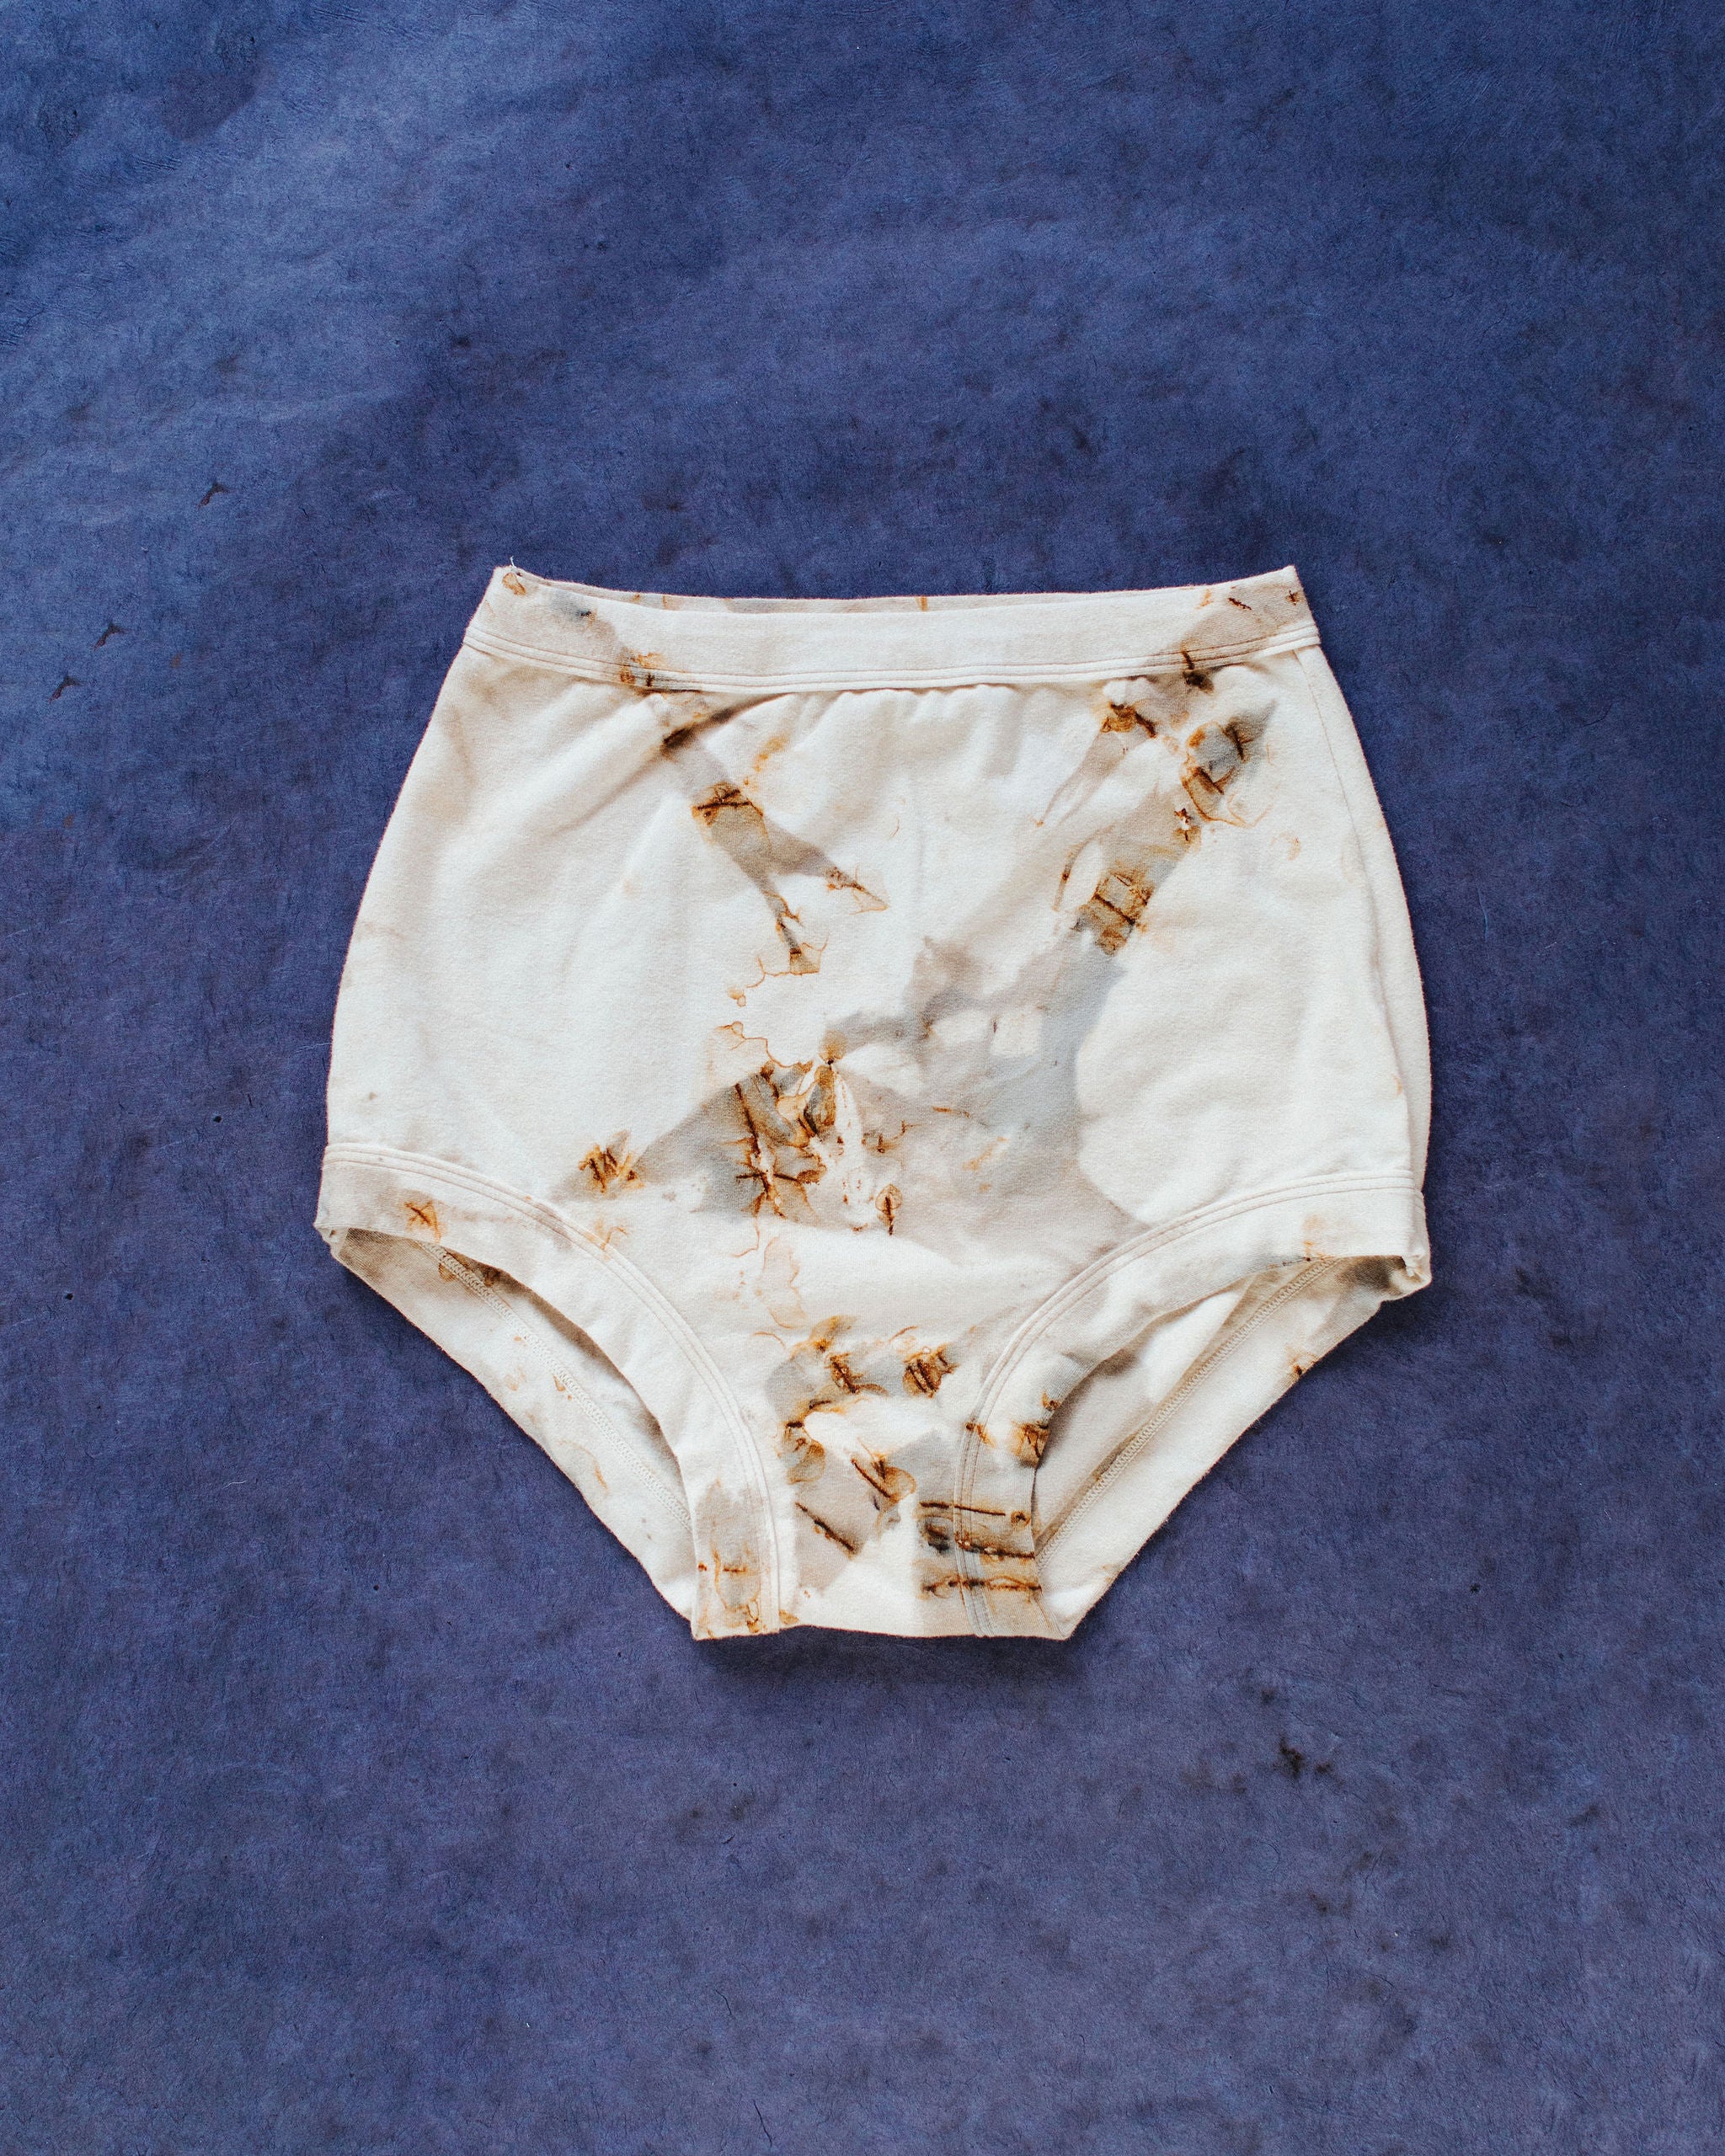 Flat lay of Thunderpants Sky Rise style underwear in Mineral Rust Dye.